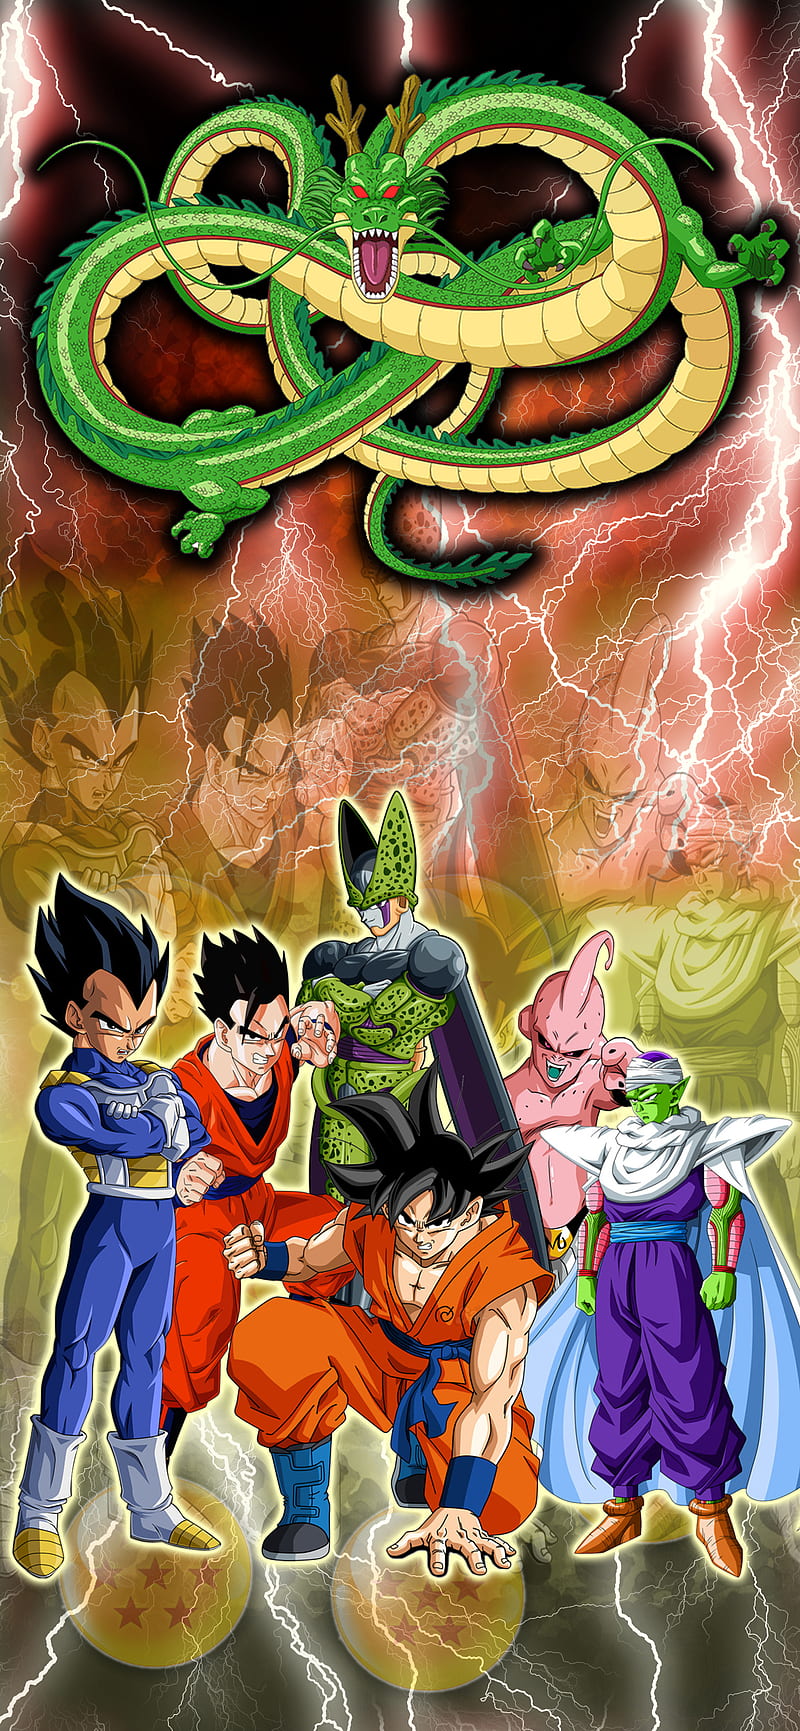 100+] Dragon Ball Z Iphone Backgrounds